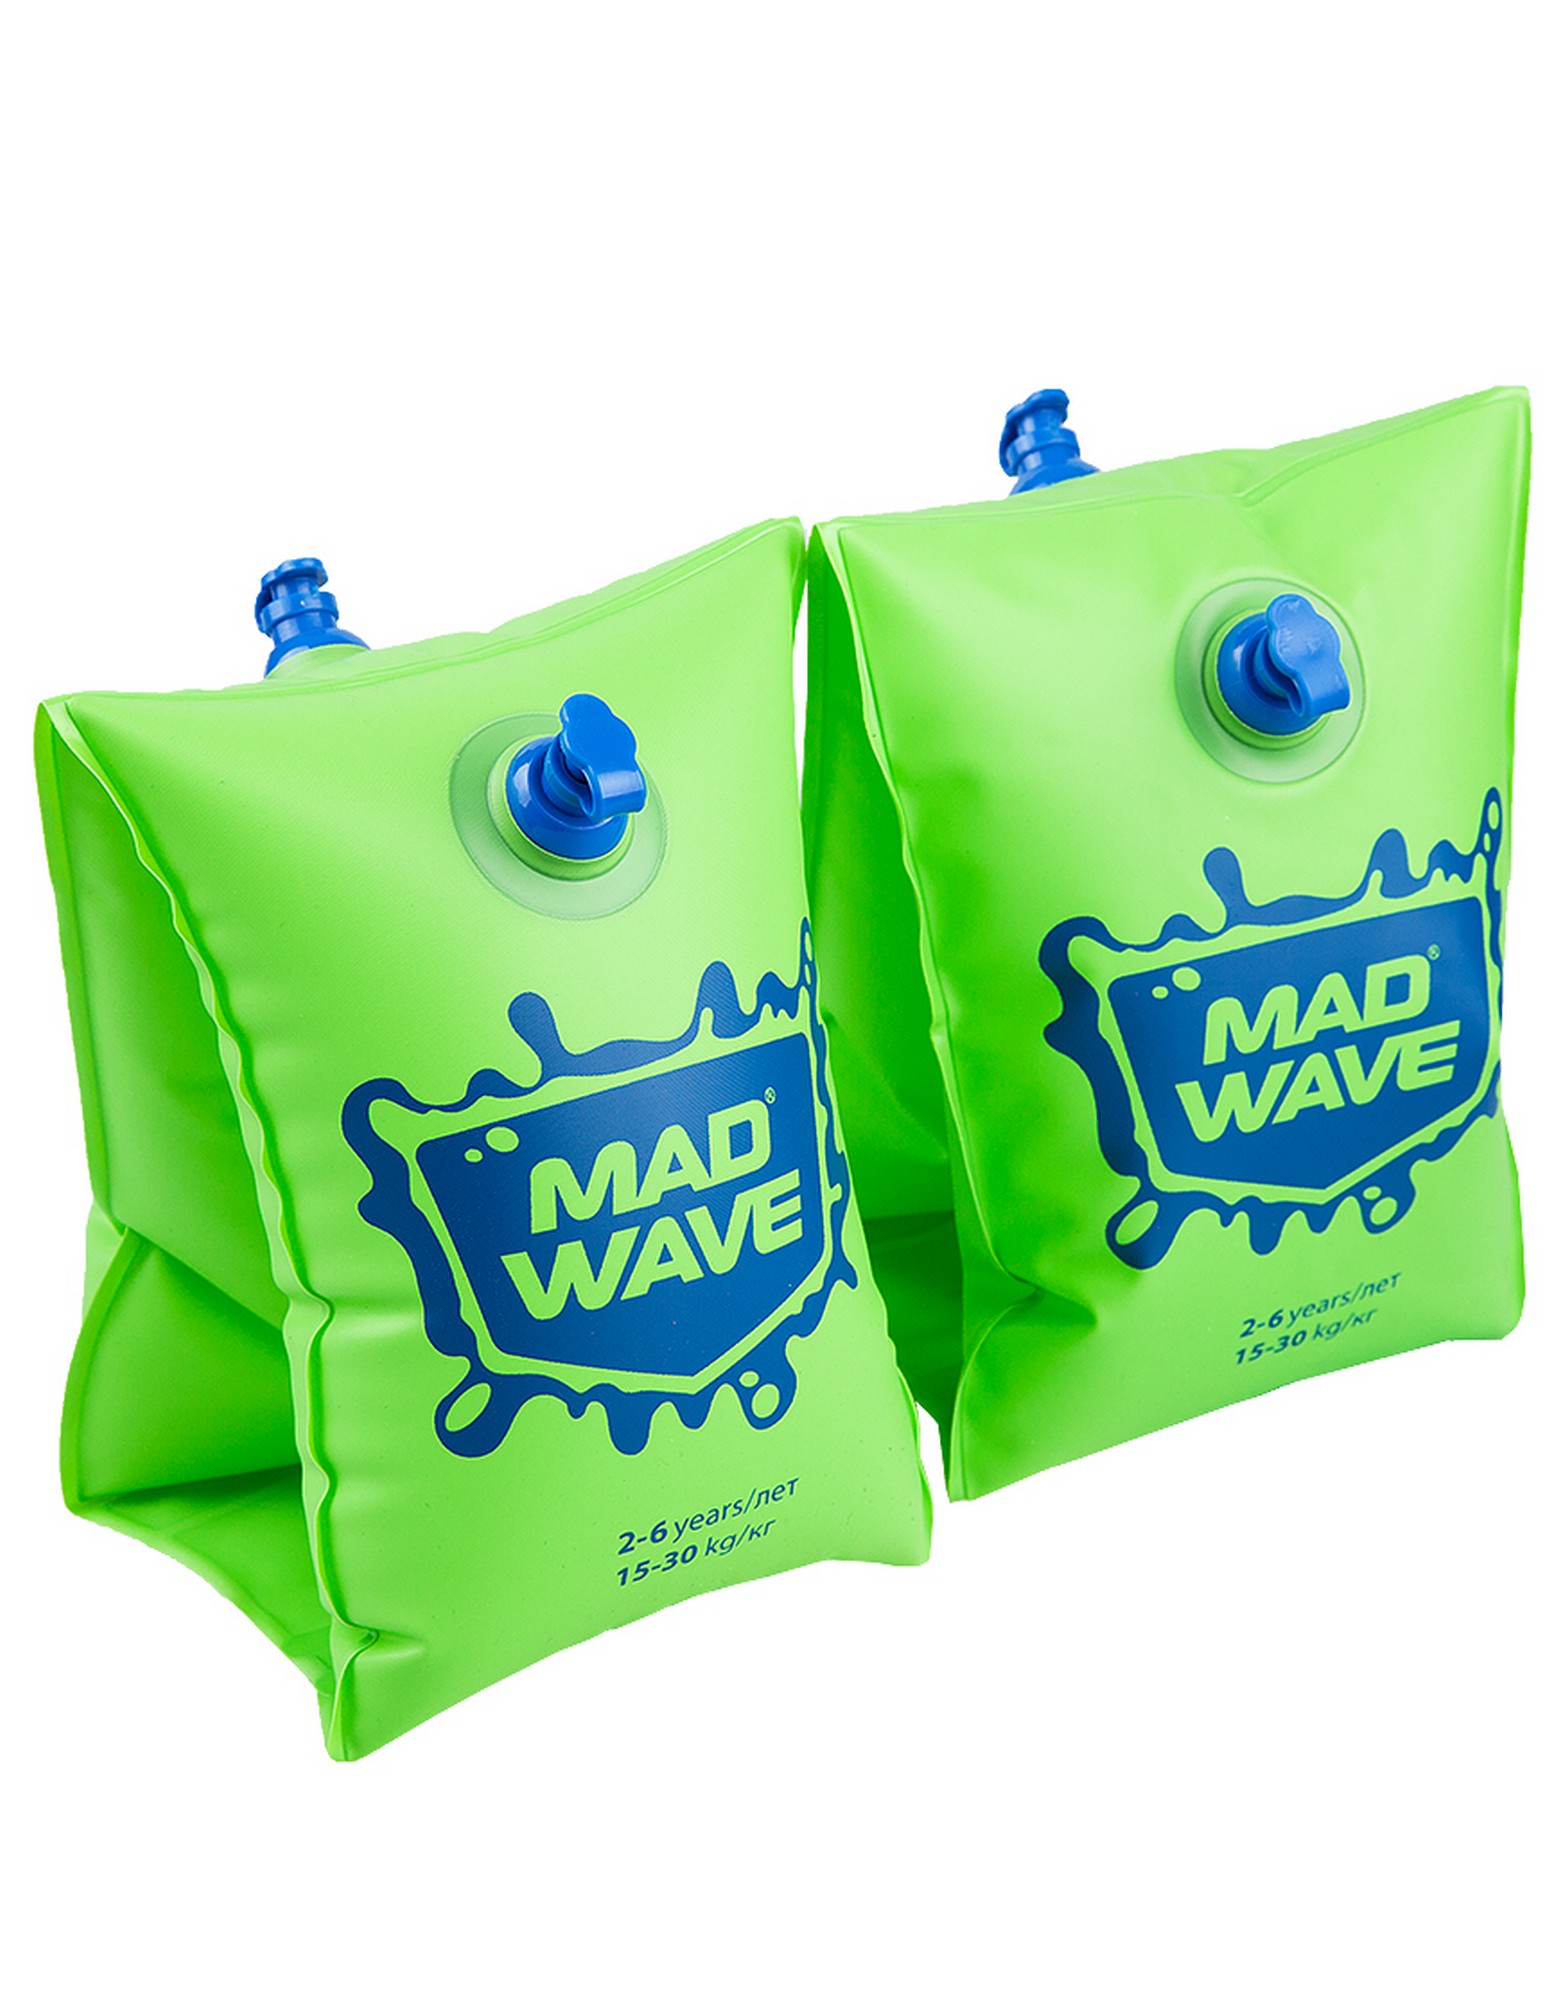  Mad Wave Mad Wave M0756 03 1 10W 